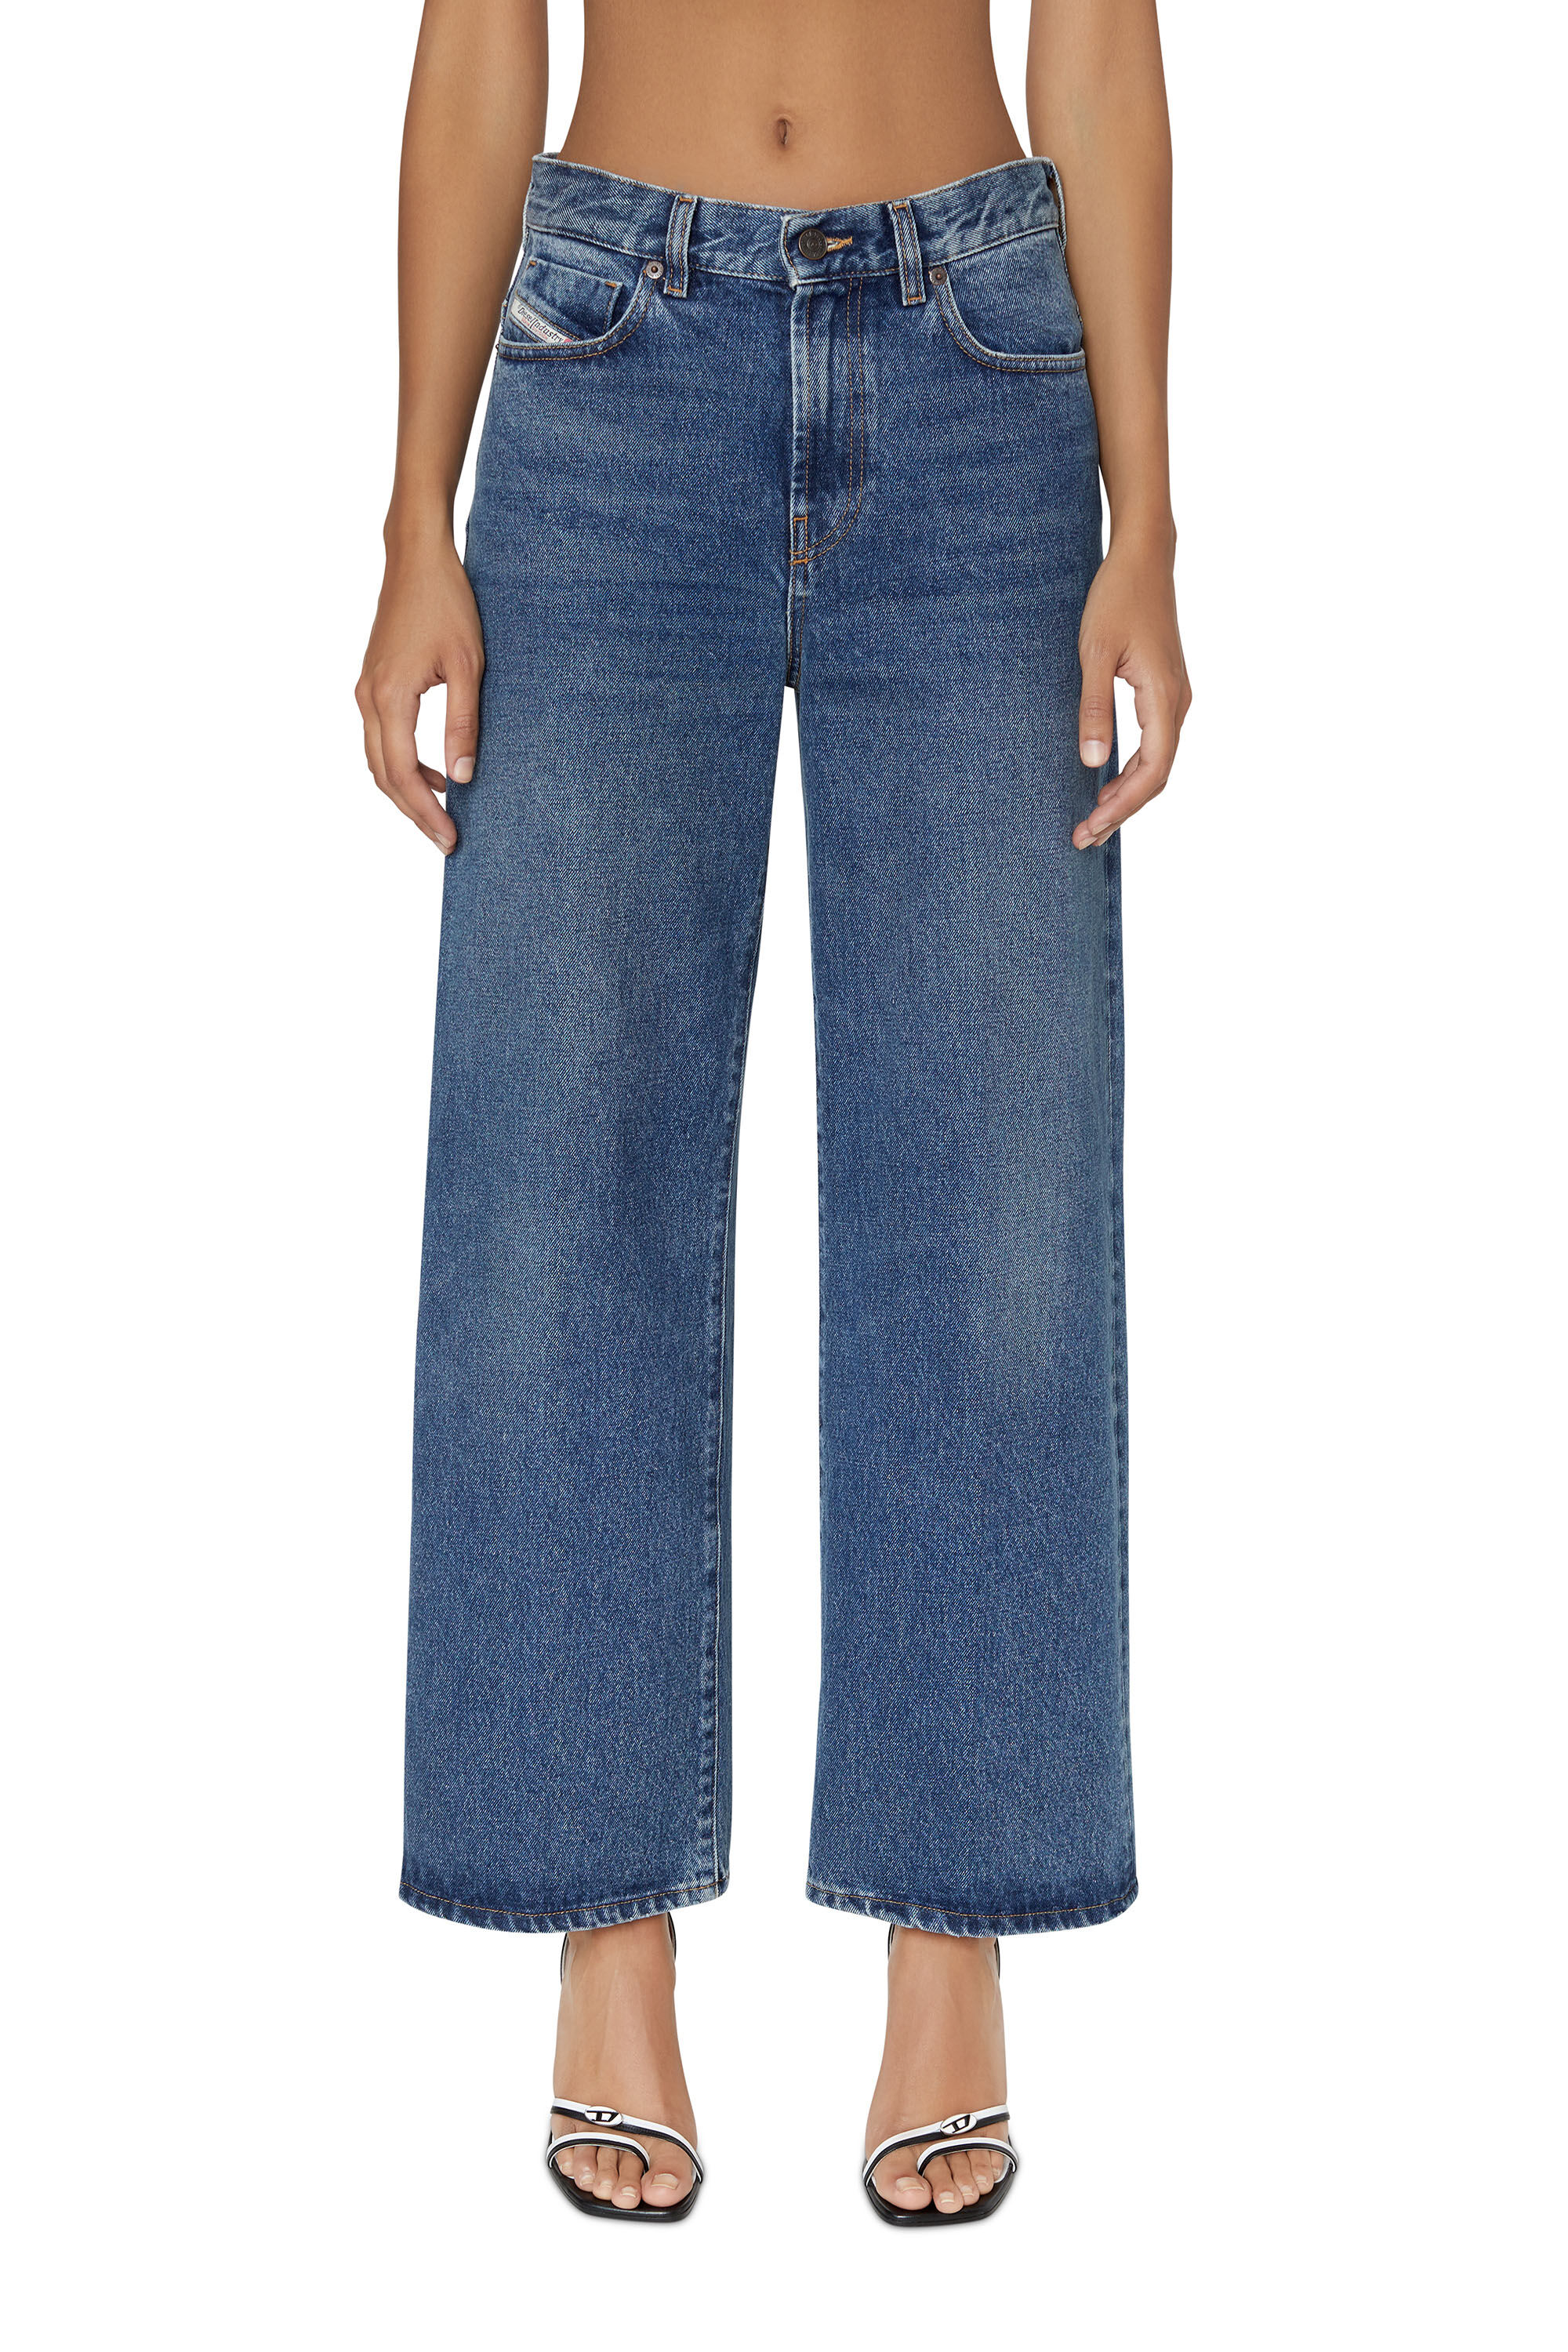 Diesel - 2000 Widee 007E5 Bootcut and Flare Jeans,  - Image 3